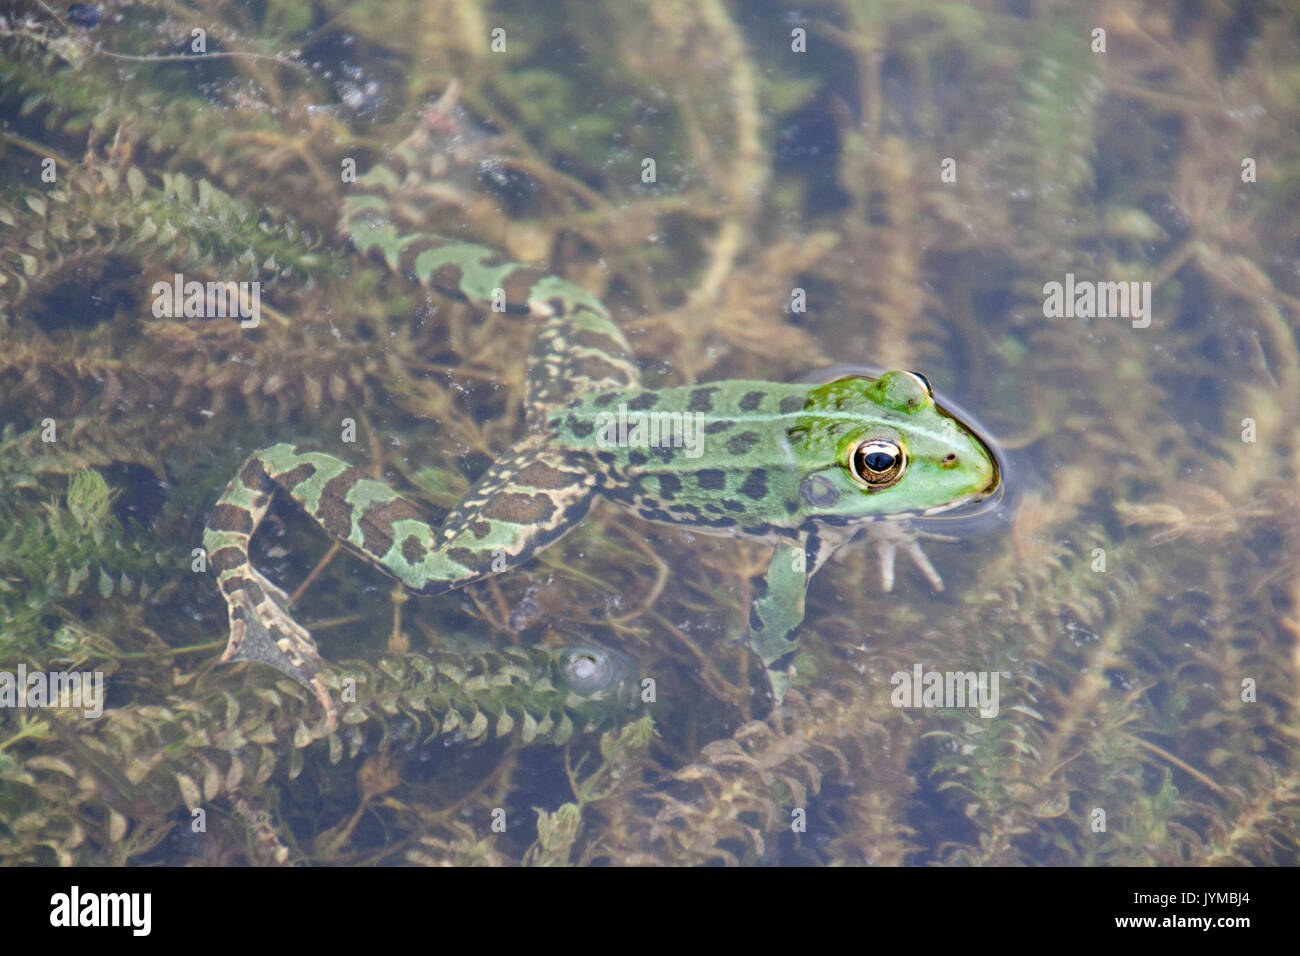 Spotted frog lugen aus Teich Stockfoto